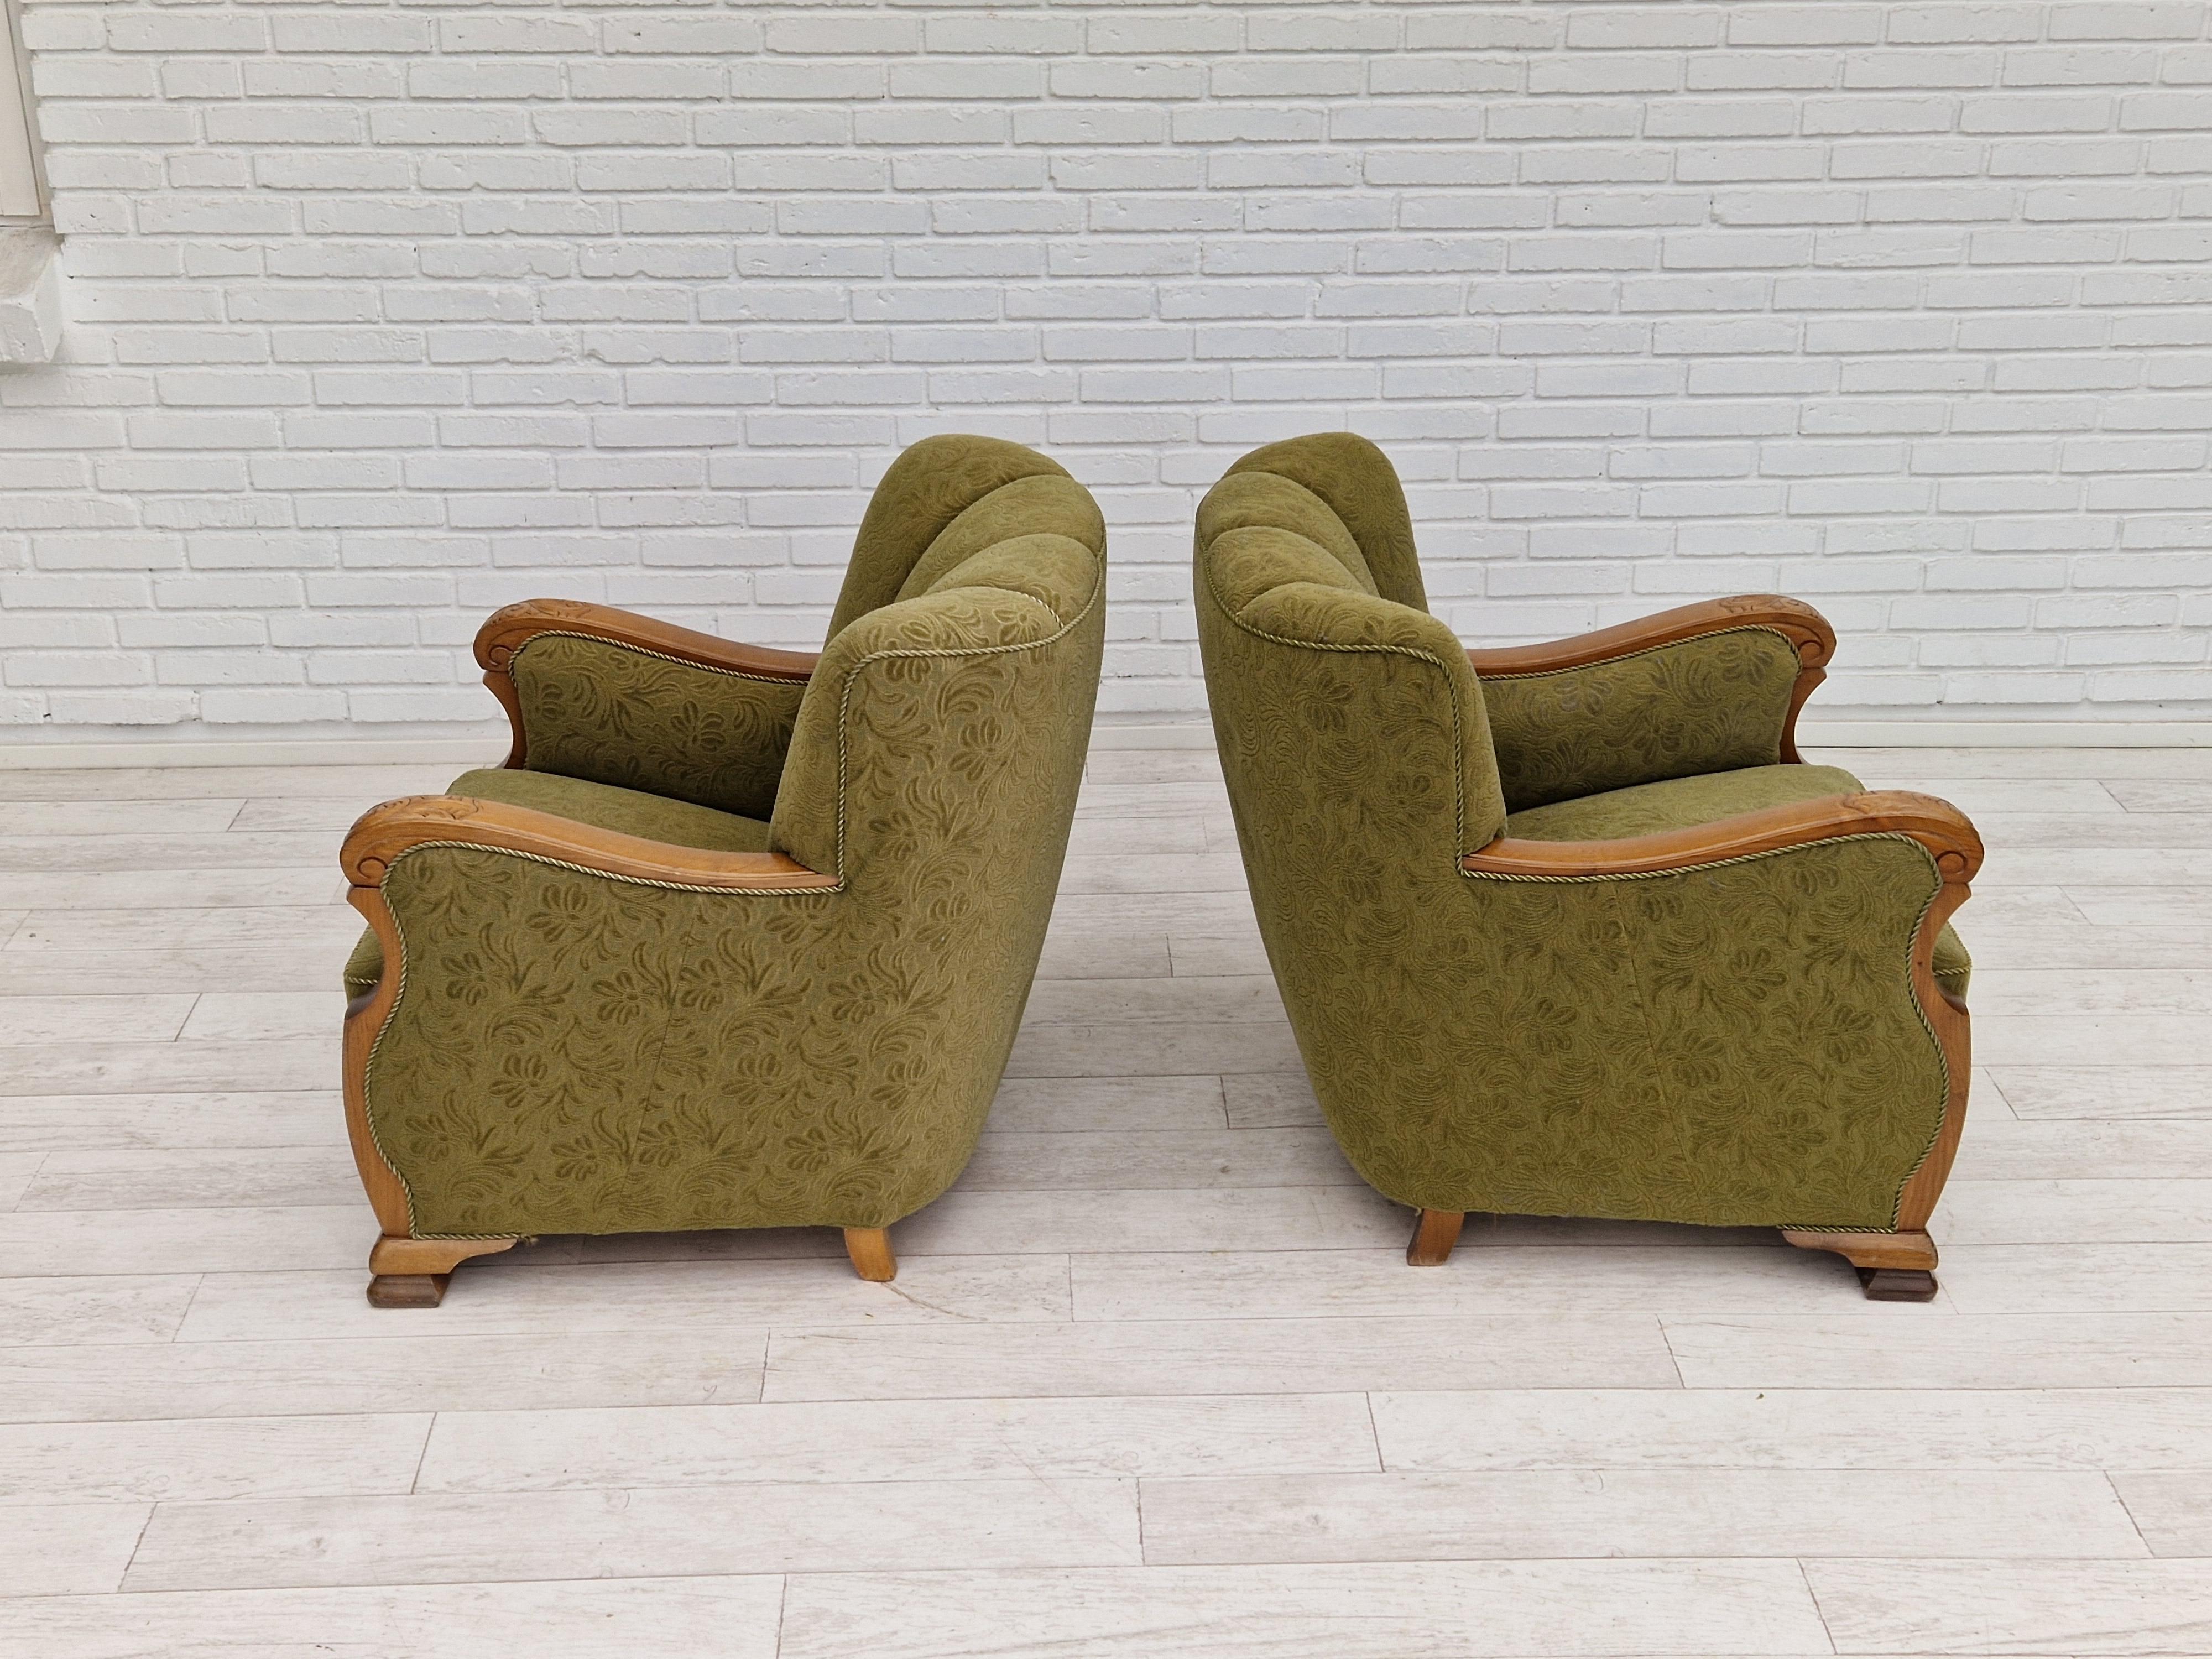 Fabric 1950s, Pair of Vintage Danish Armchairs, Original Very Good Condition For Sale